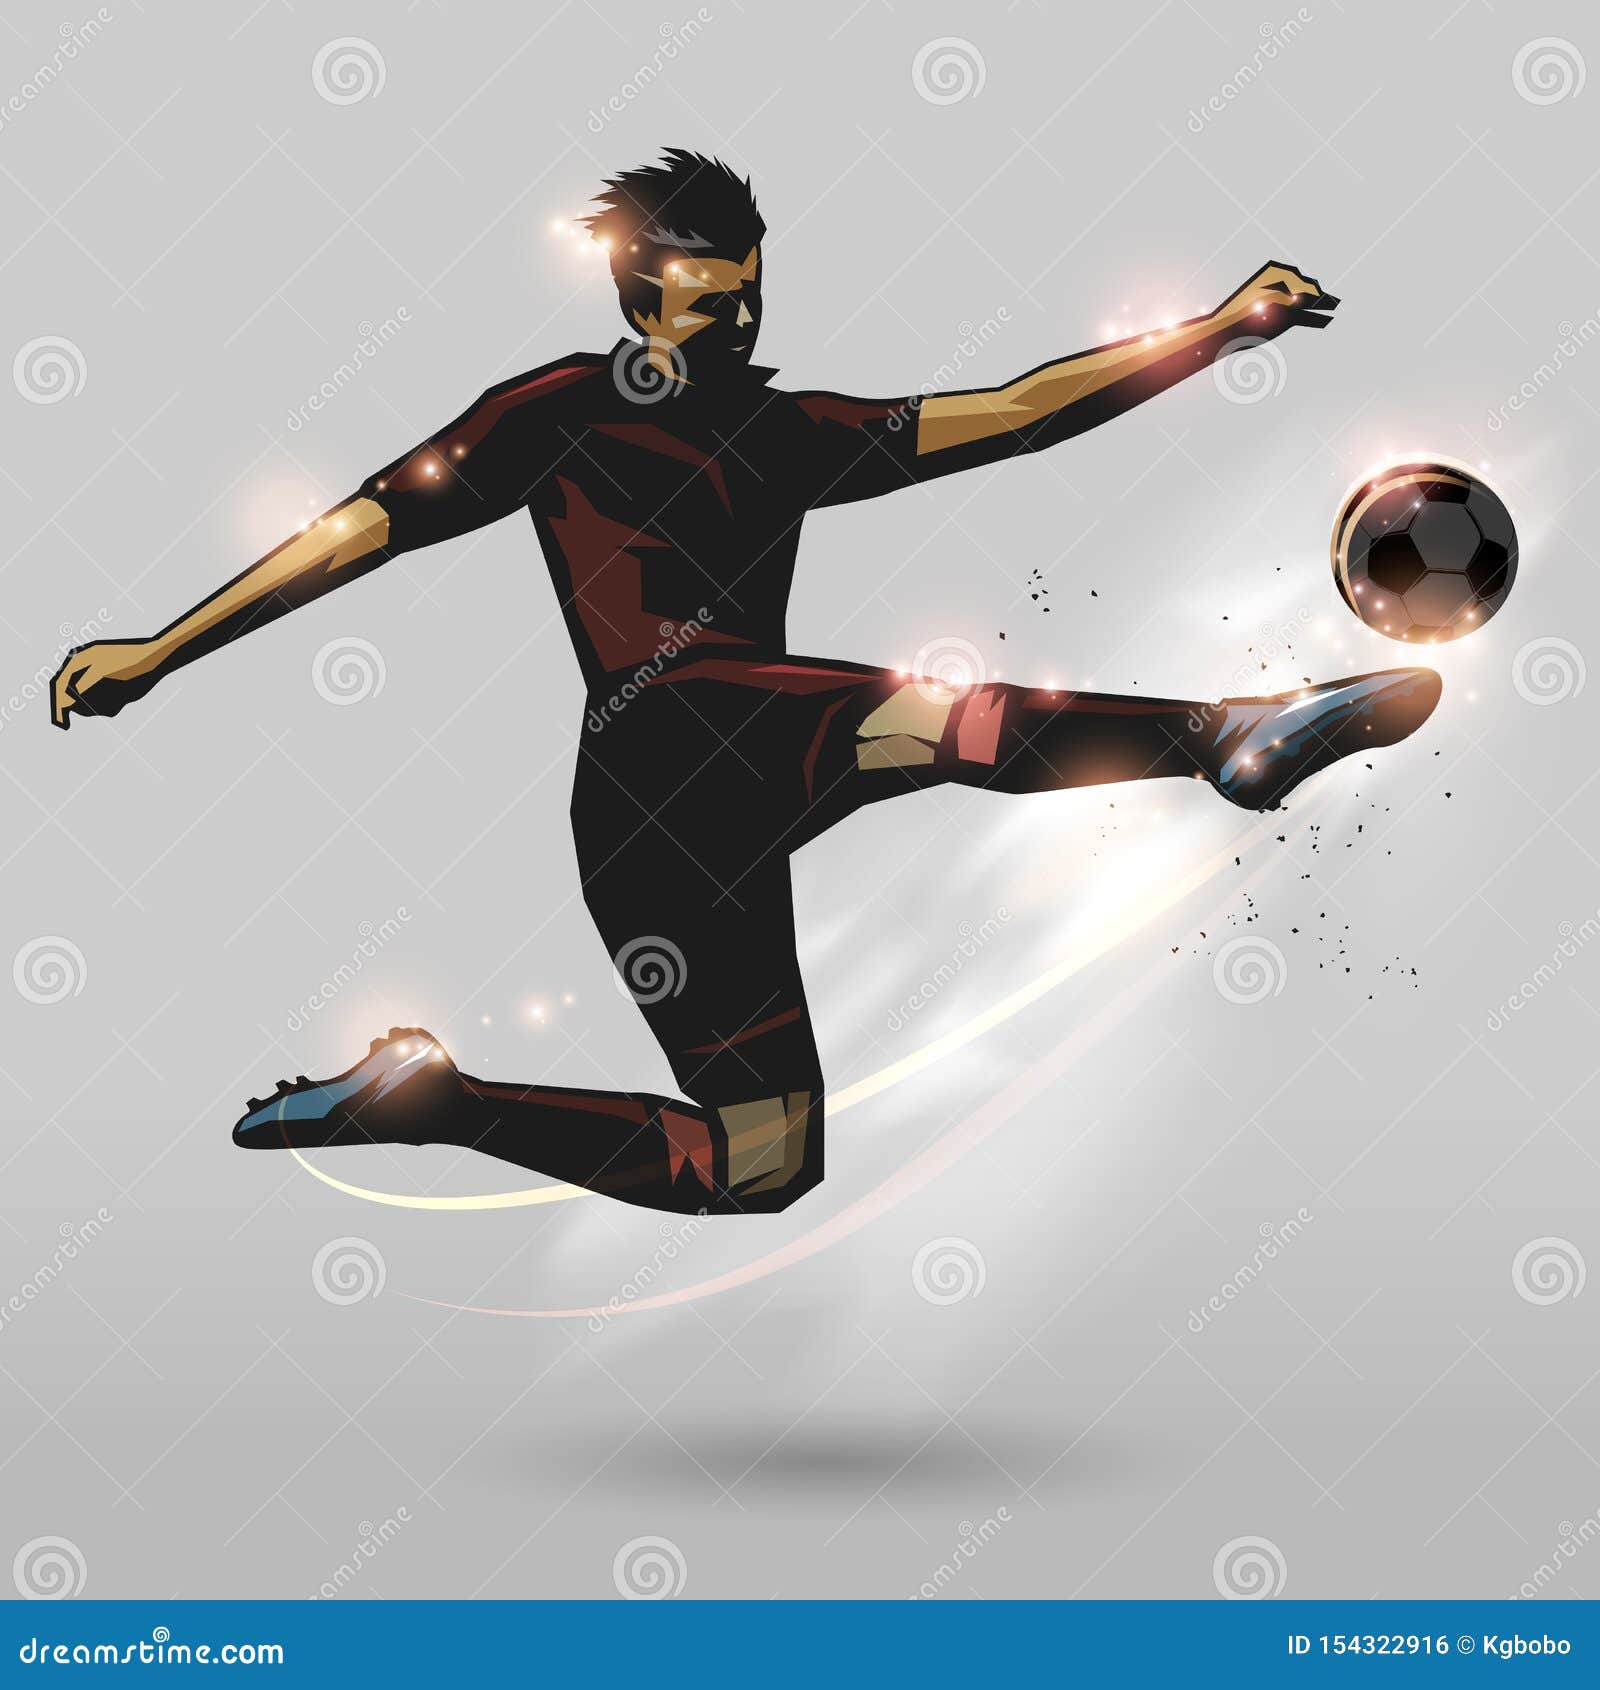 Soccer player half volley stock vector. Illustration of male